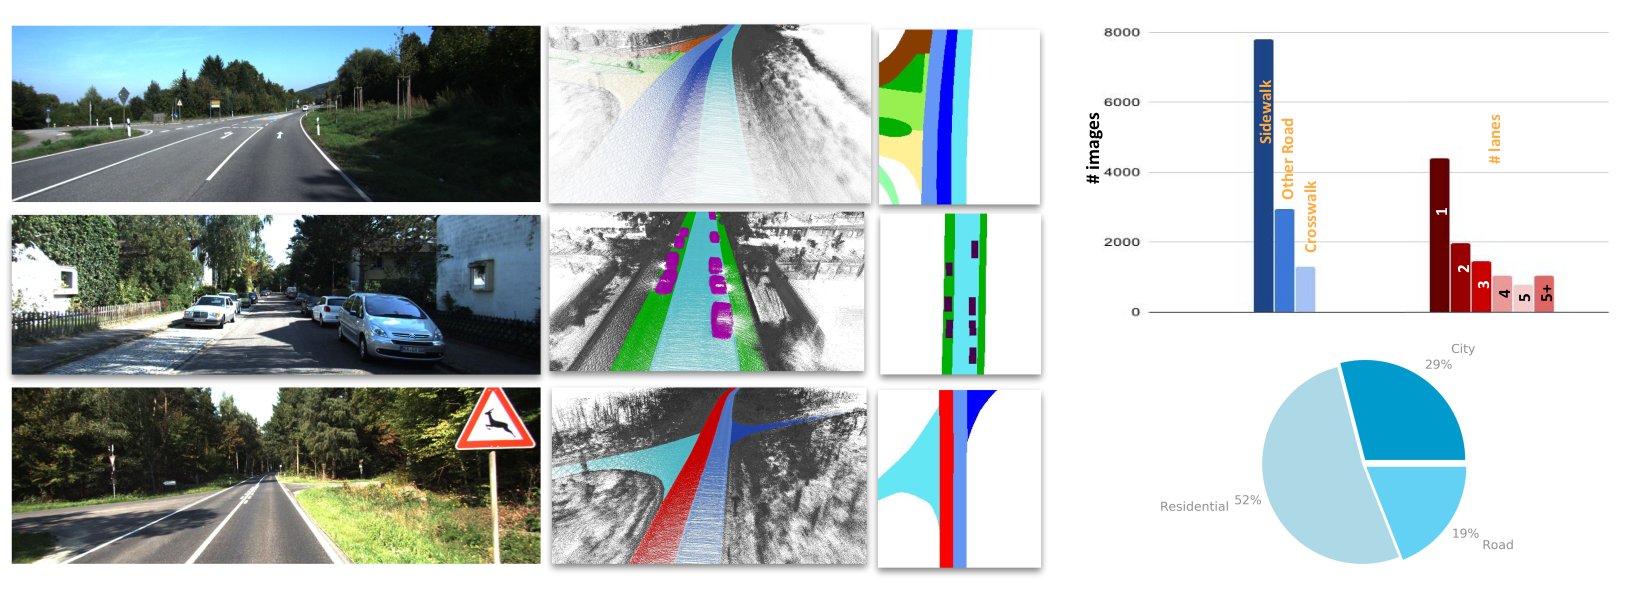 A preview of the AutoLay benchmark for estimating the bird’s-eye view layout of a road scene.